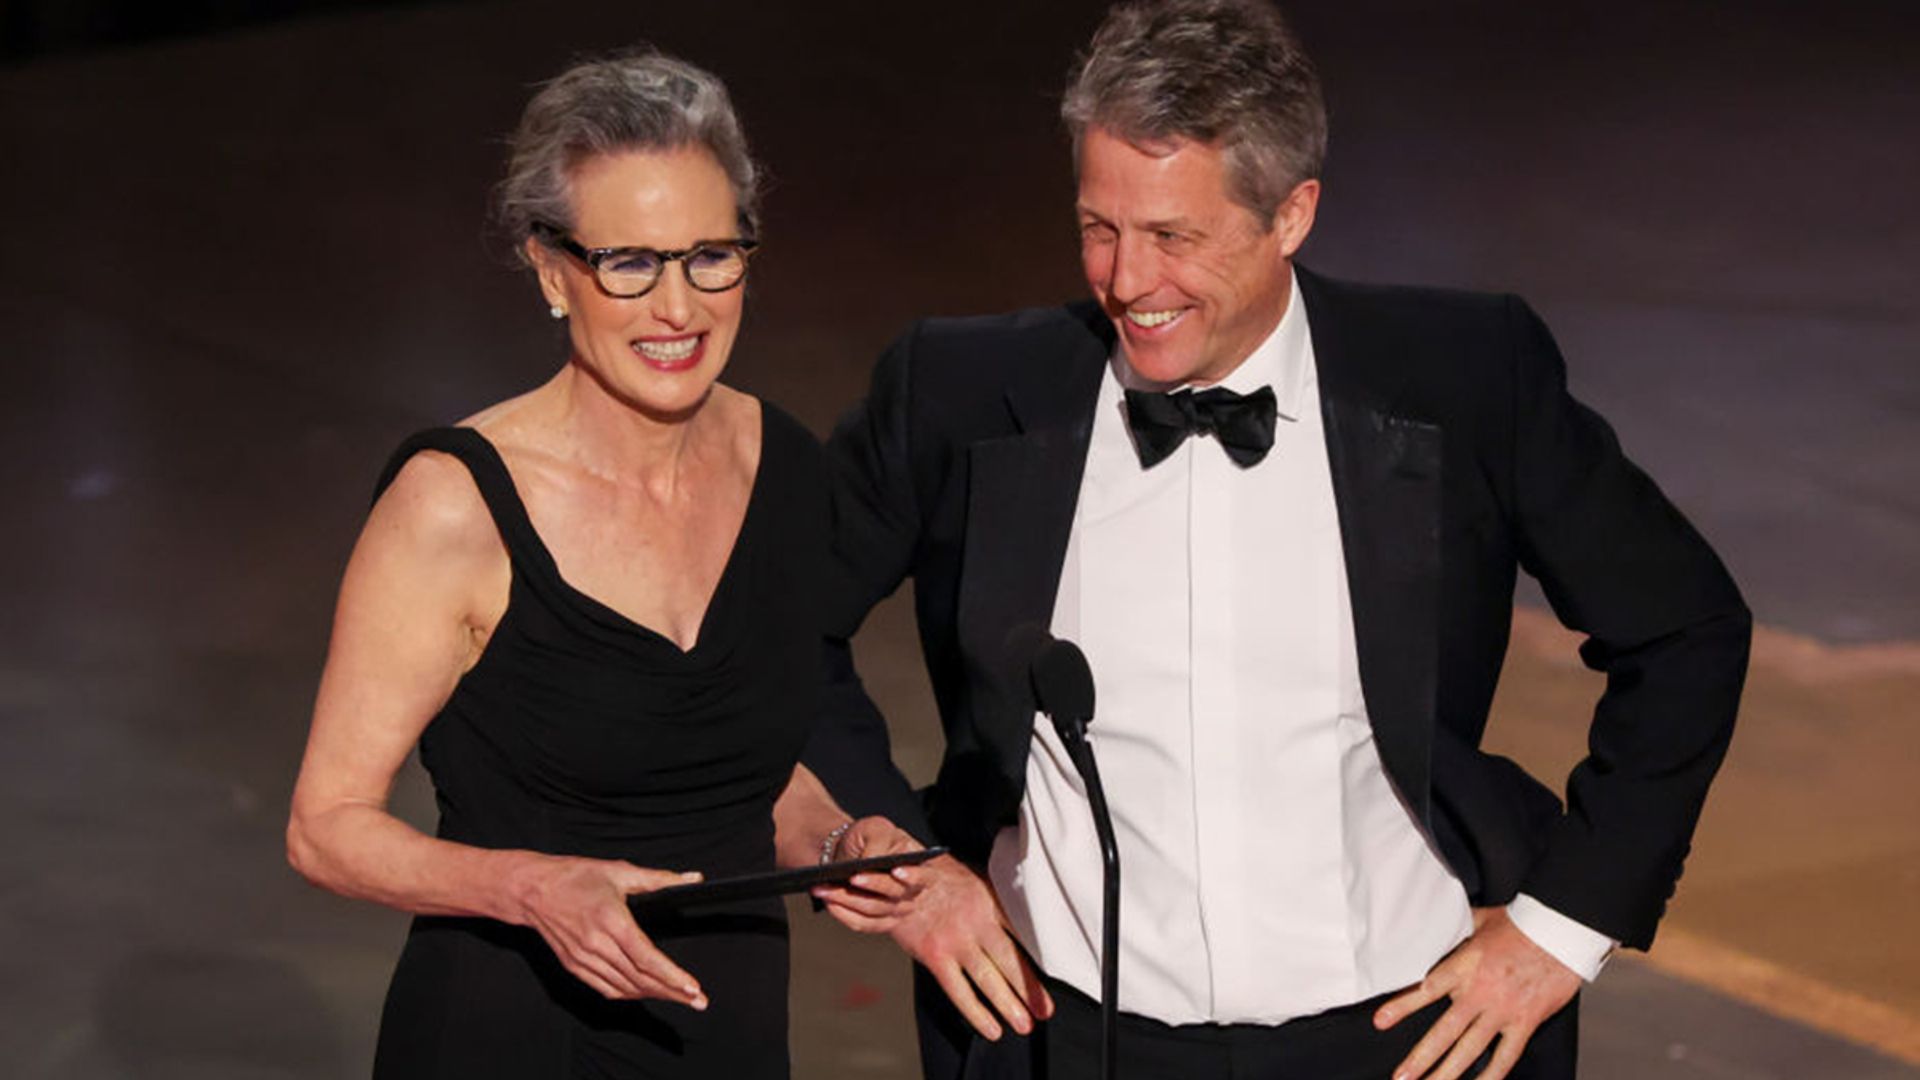 Hugh Grant and Andie MacDowell reunite at the Oscars and fans are